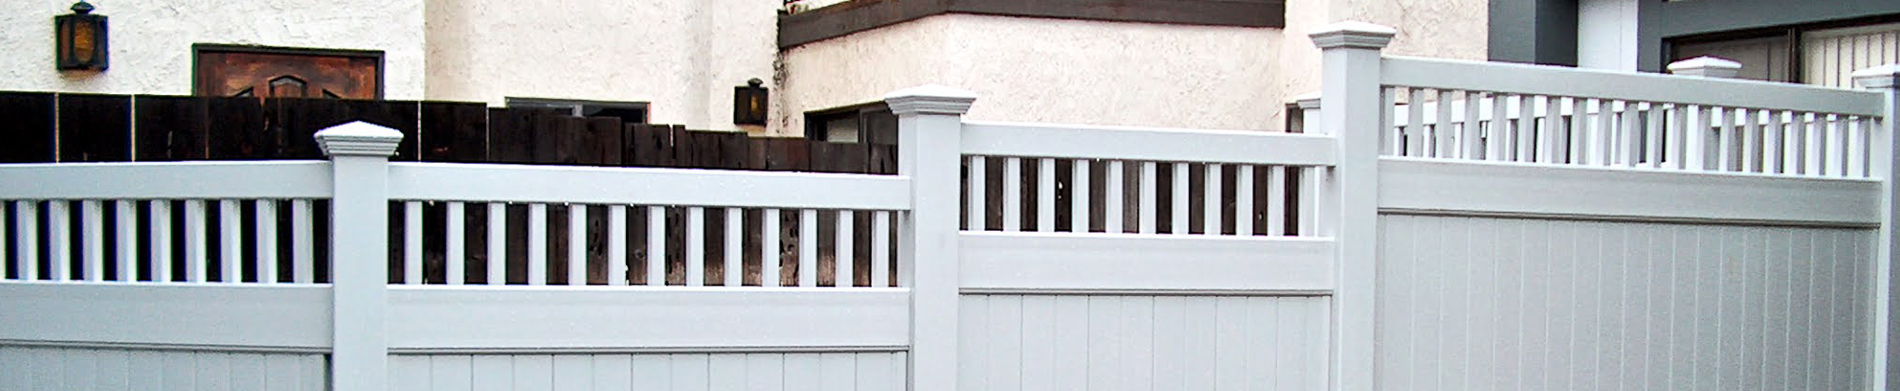 Susanne was looking for USA made vinyl fencing -She installed a backyard fence from Duramax